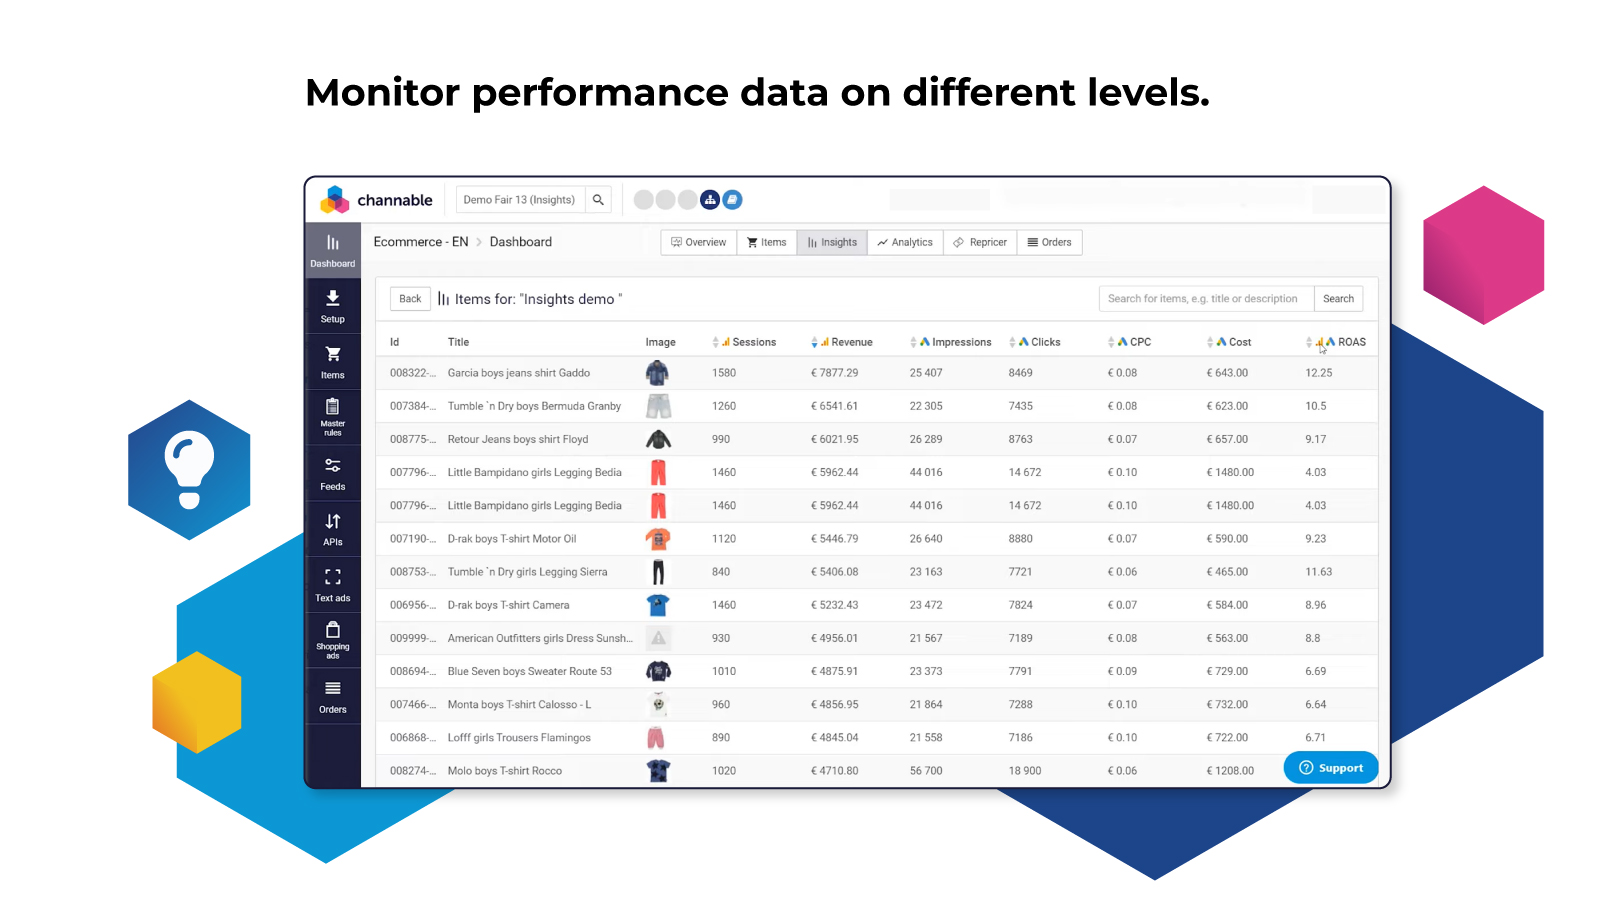 Monitor performance data on different levels